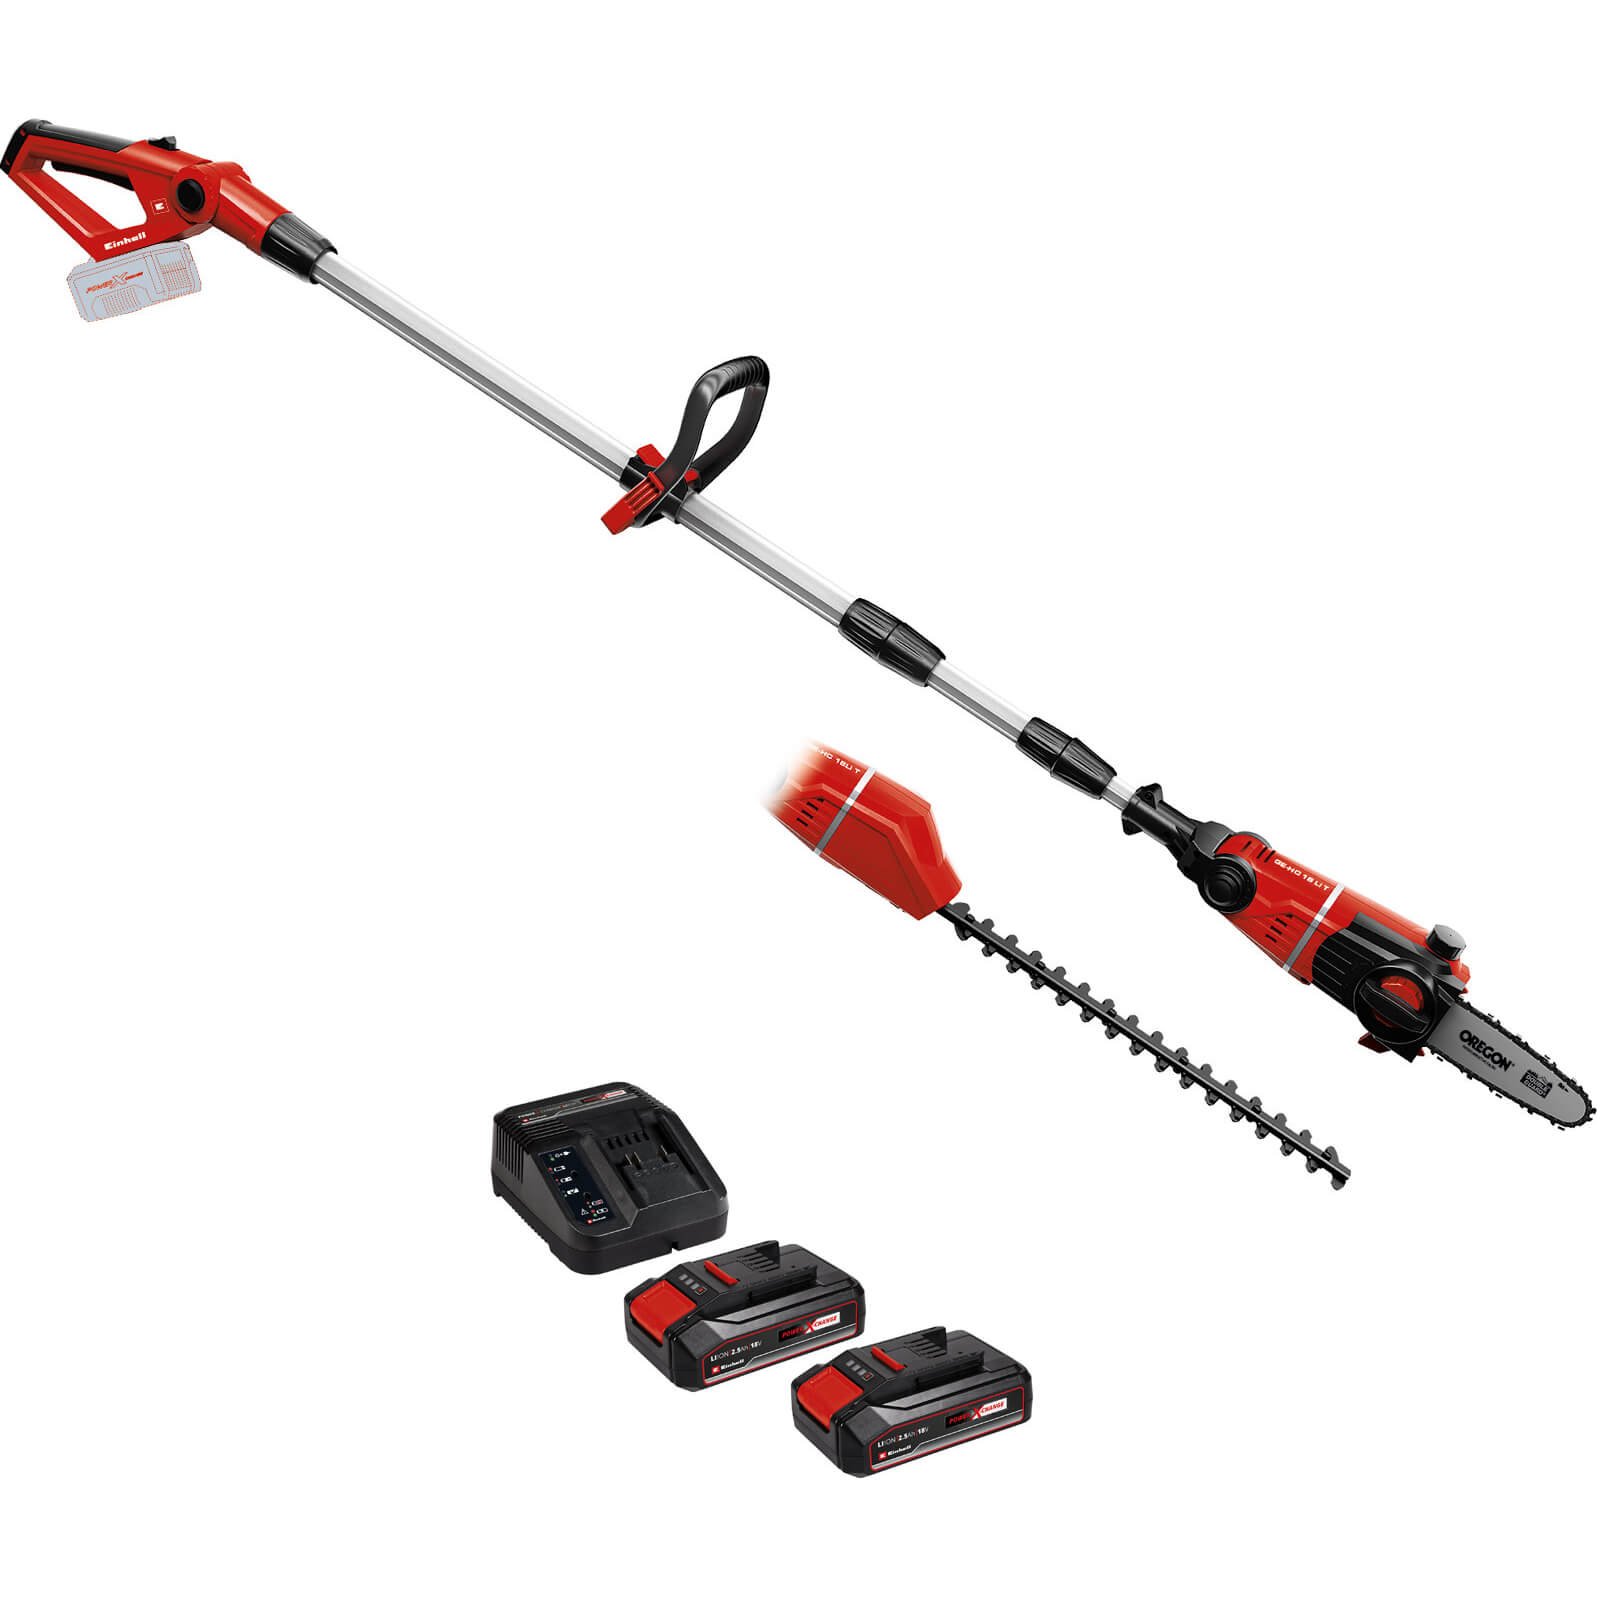 Einhell GE-HC 18 Li T 18v Cordless Telescopic Pole Pruner and Hedge Trimmer 2 x 2.5ah Li-ion Charger